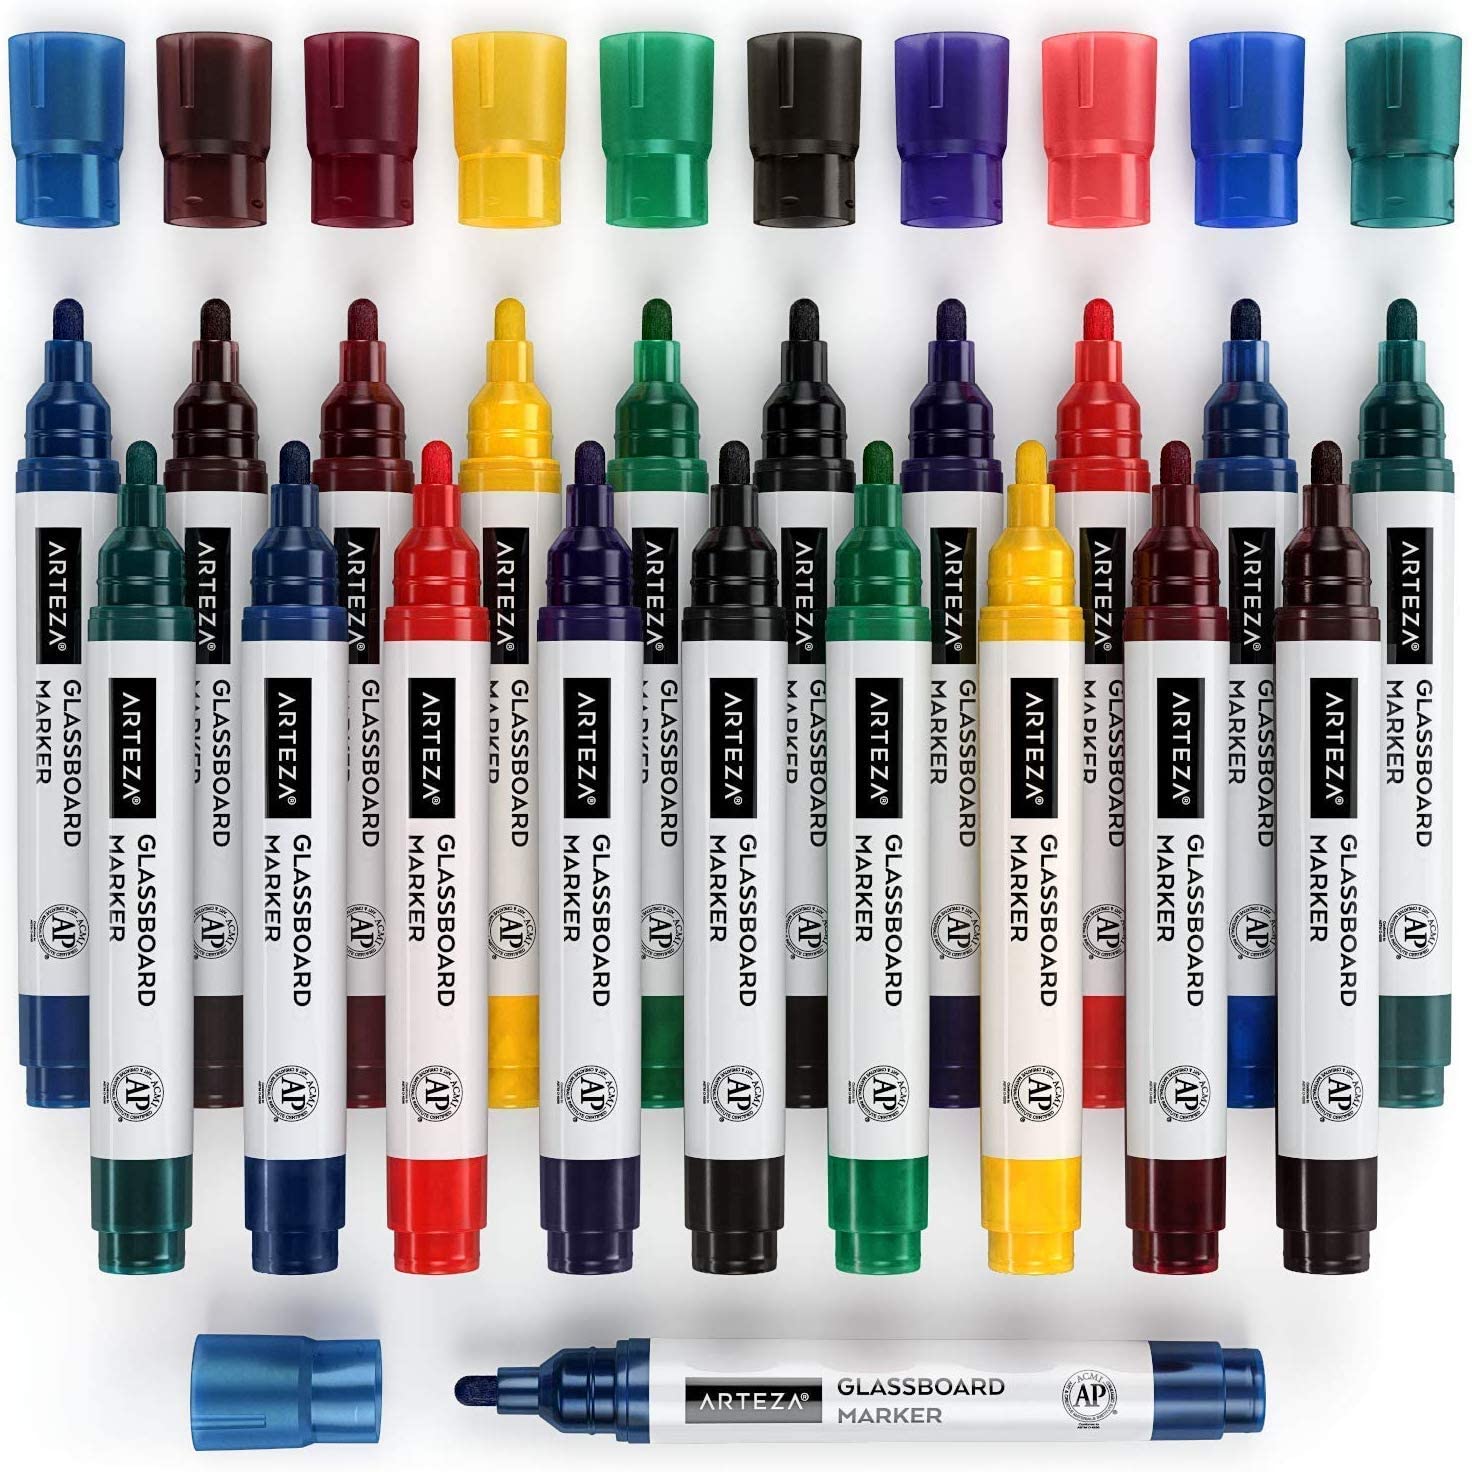 ZZDH251 Arteza Dry Erase Markers for Glass Boards Pack of 18, 10 Classic  and 8 Neon Colors with Low-Odor Ink, Erasable Window Markers